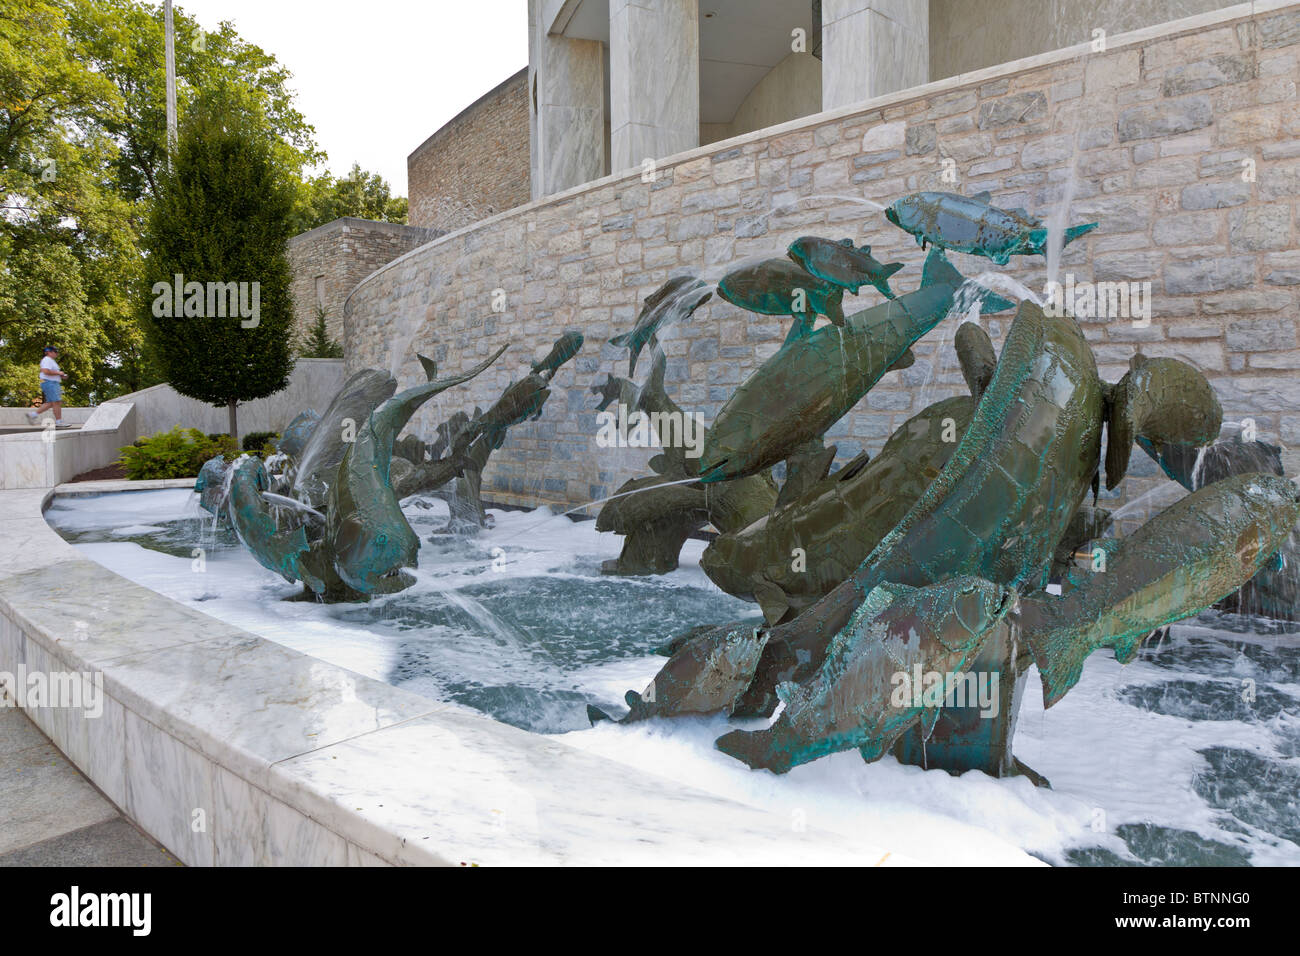 Hershey, PA - Sept 2009 - Water sculpture outside of the front entrance to Milton Hershey School in Hershey Pennsylvania Stock Photo